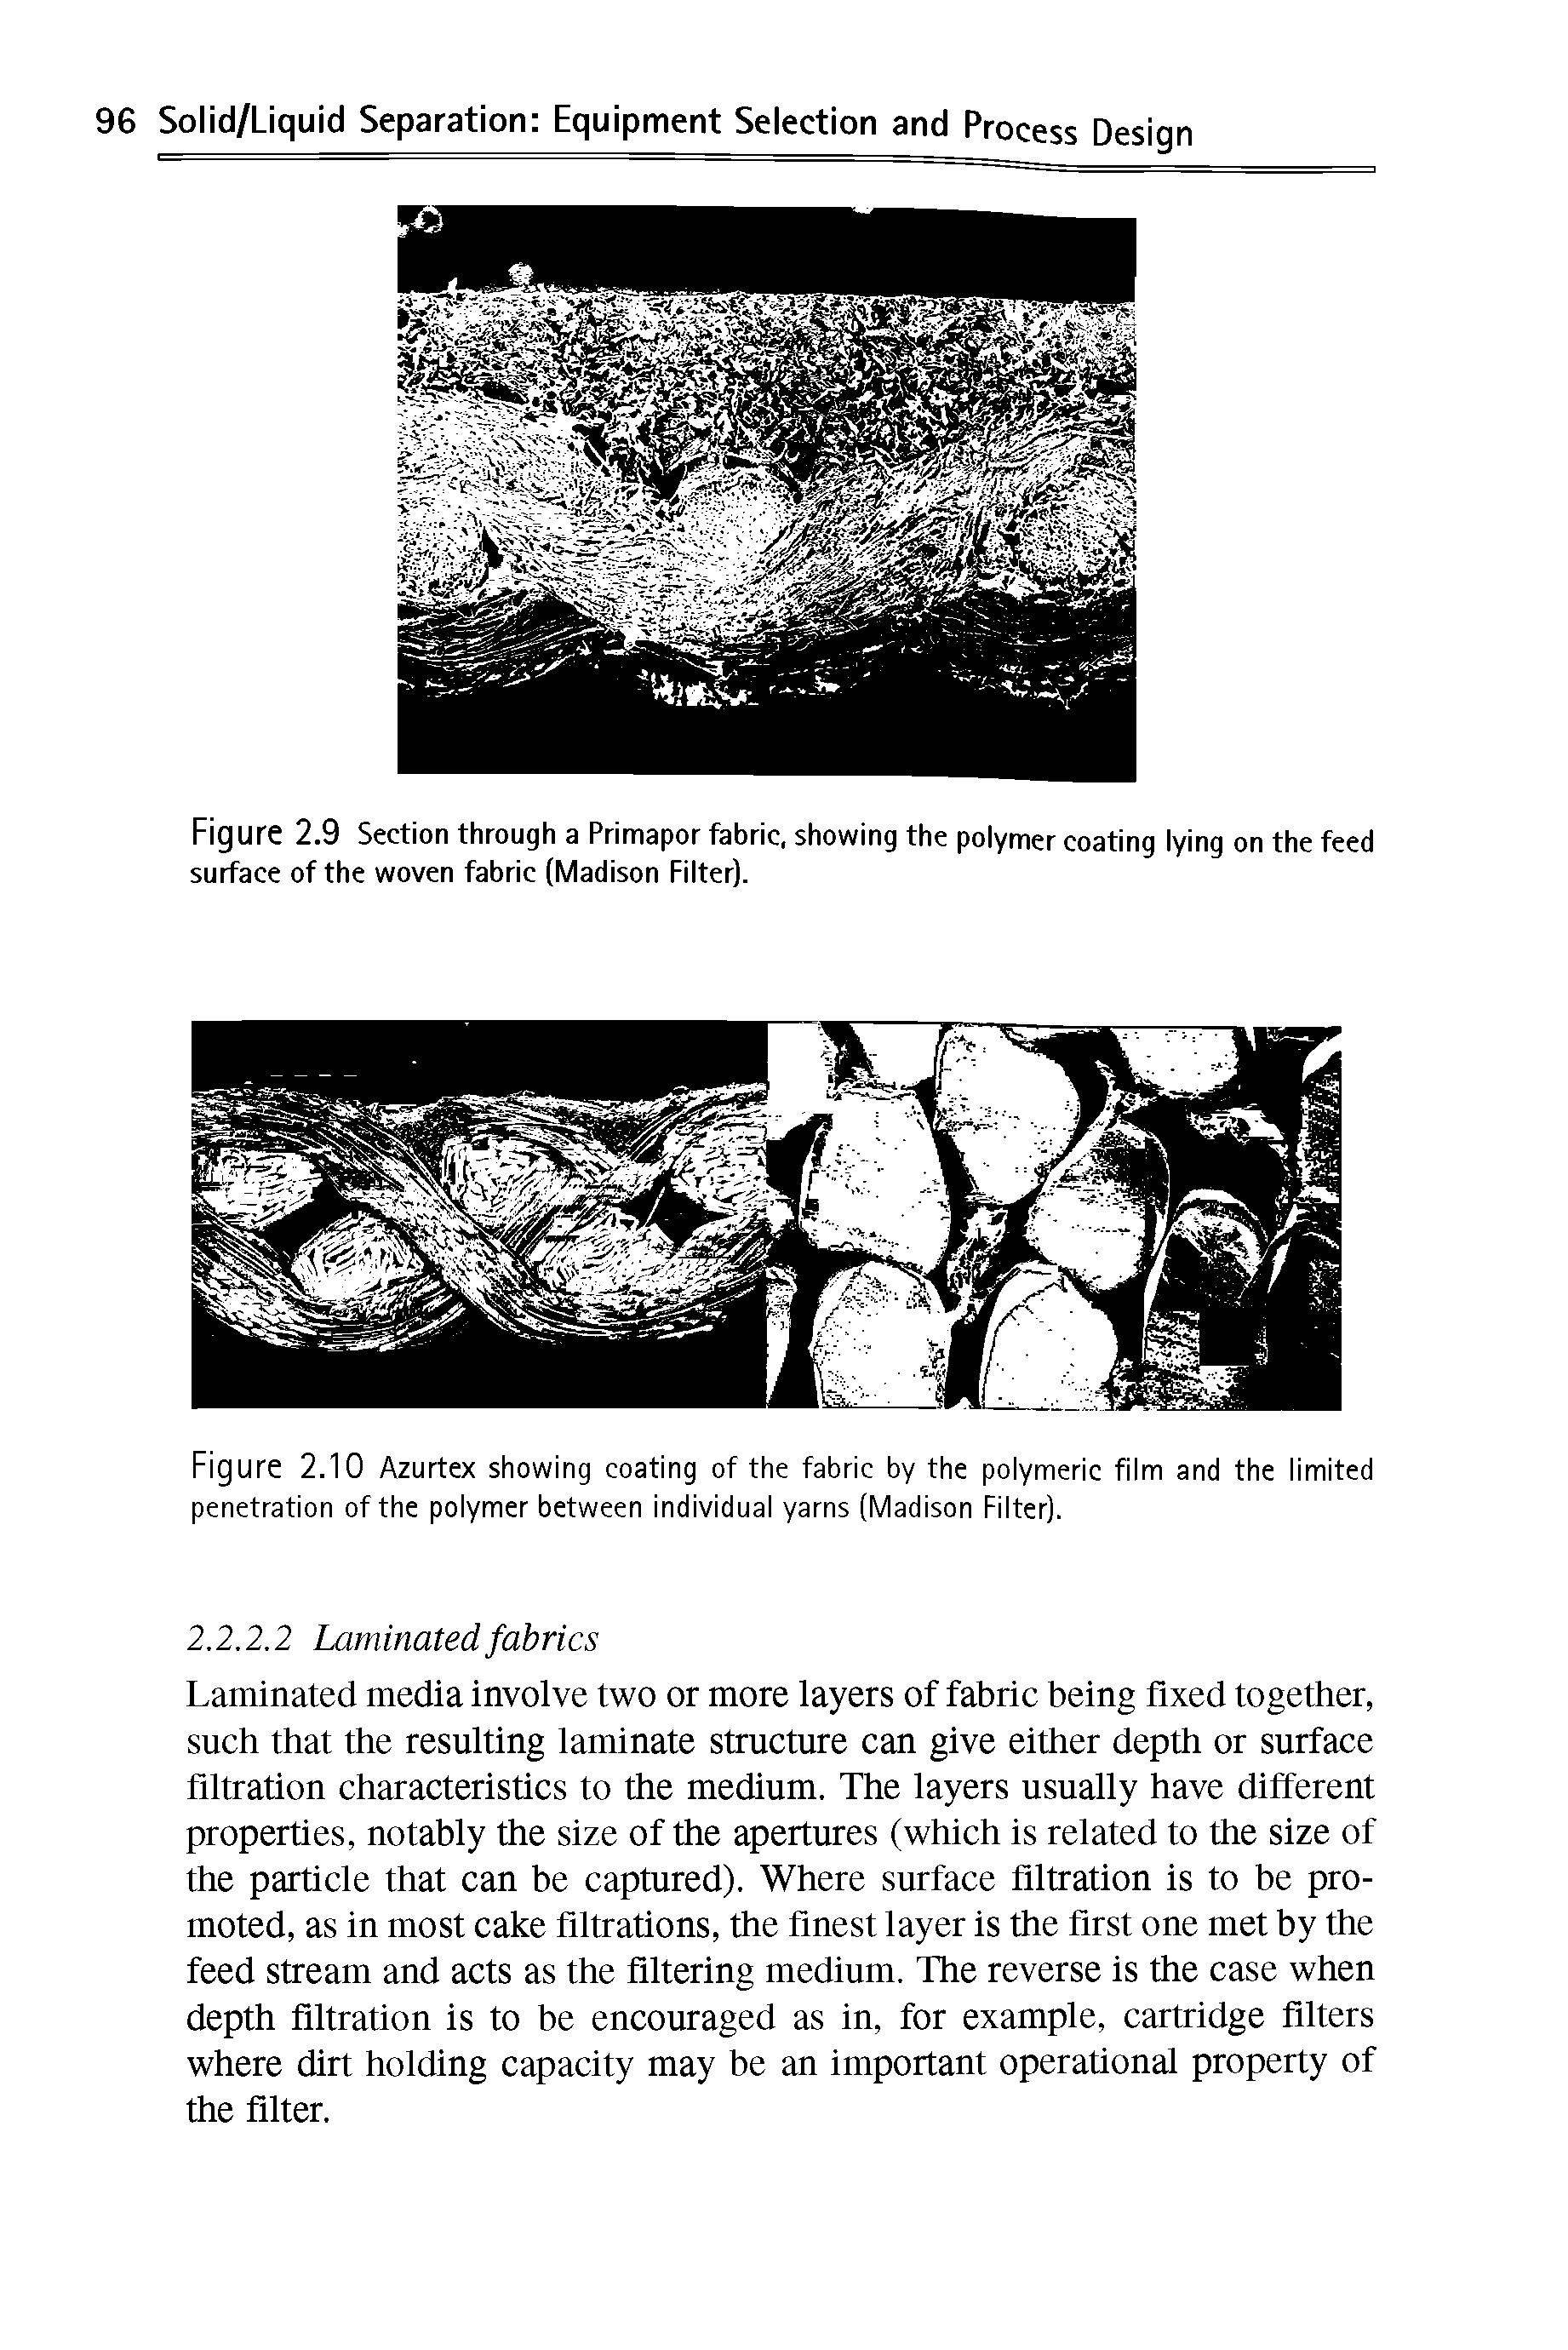 Figure 2.10 Azurtex showing coating of the fabric by the polymeric film and the limited penetration of the polymer between individual yarns (Madison Filter).